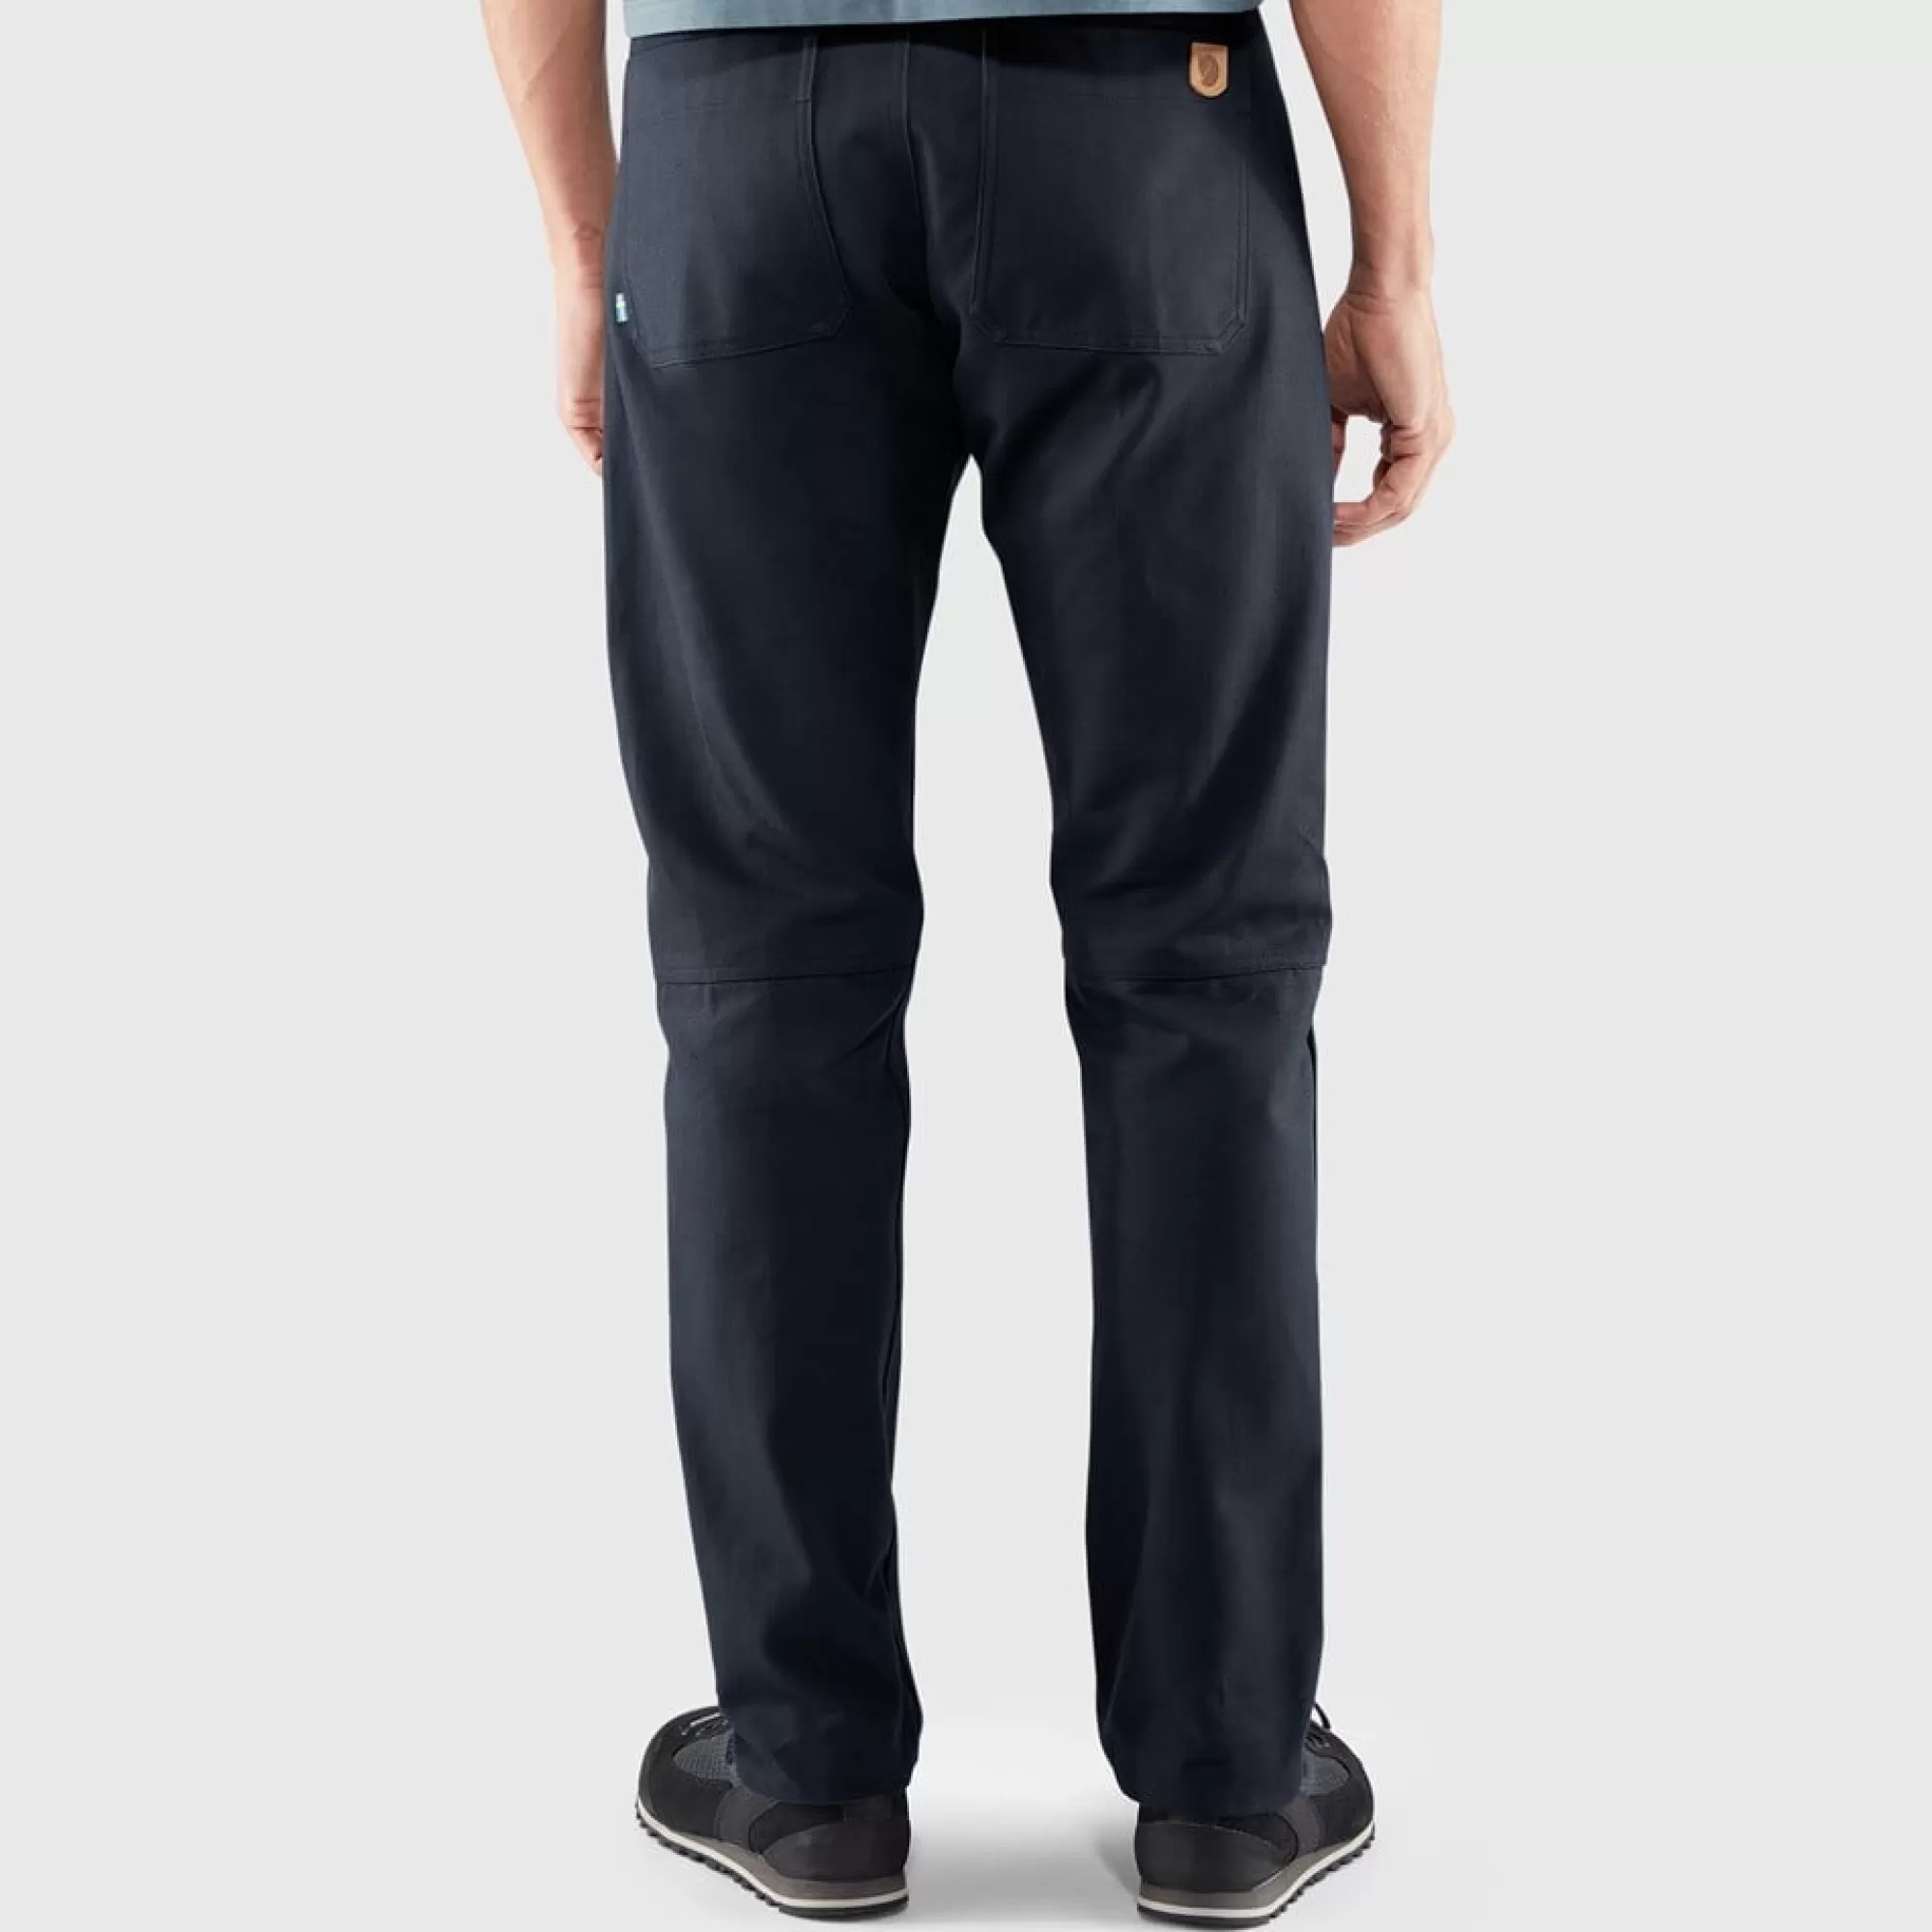 Outdoor Trousers*MEN Fjallraven Greenland Canvas Jeans M Long DarkSand